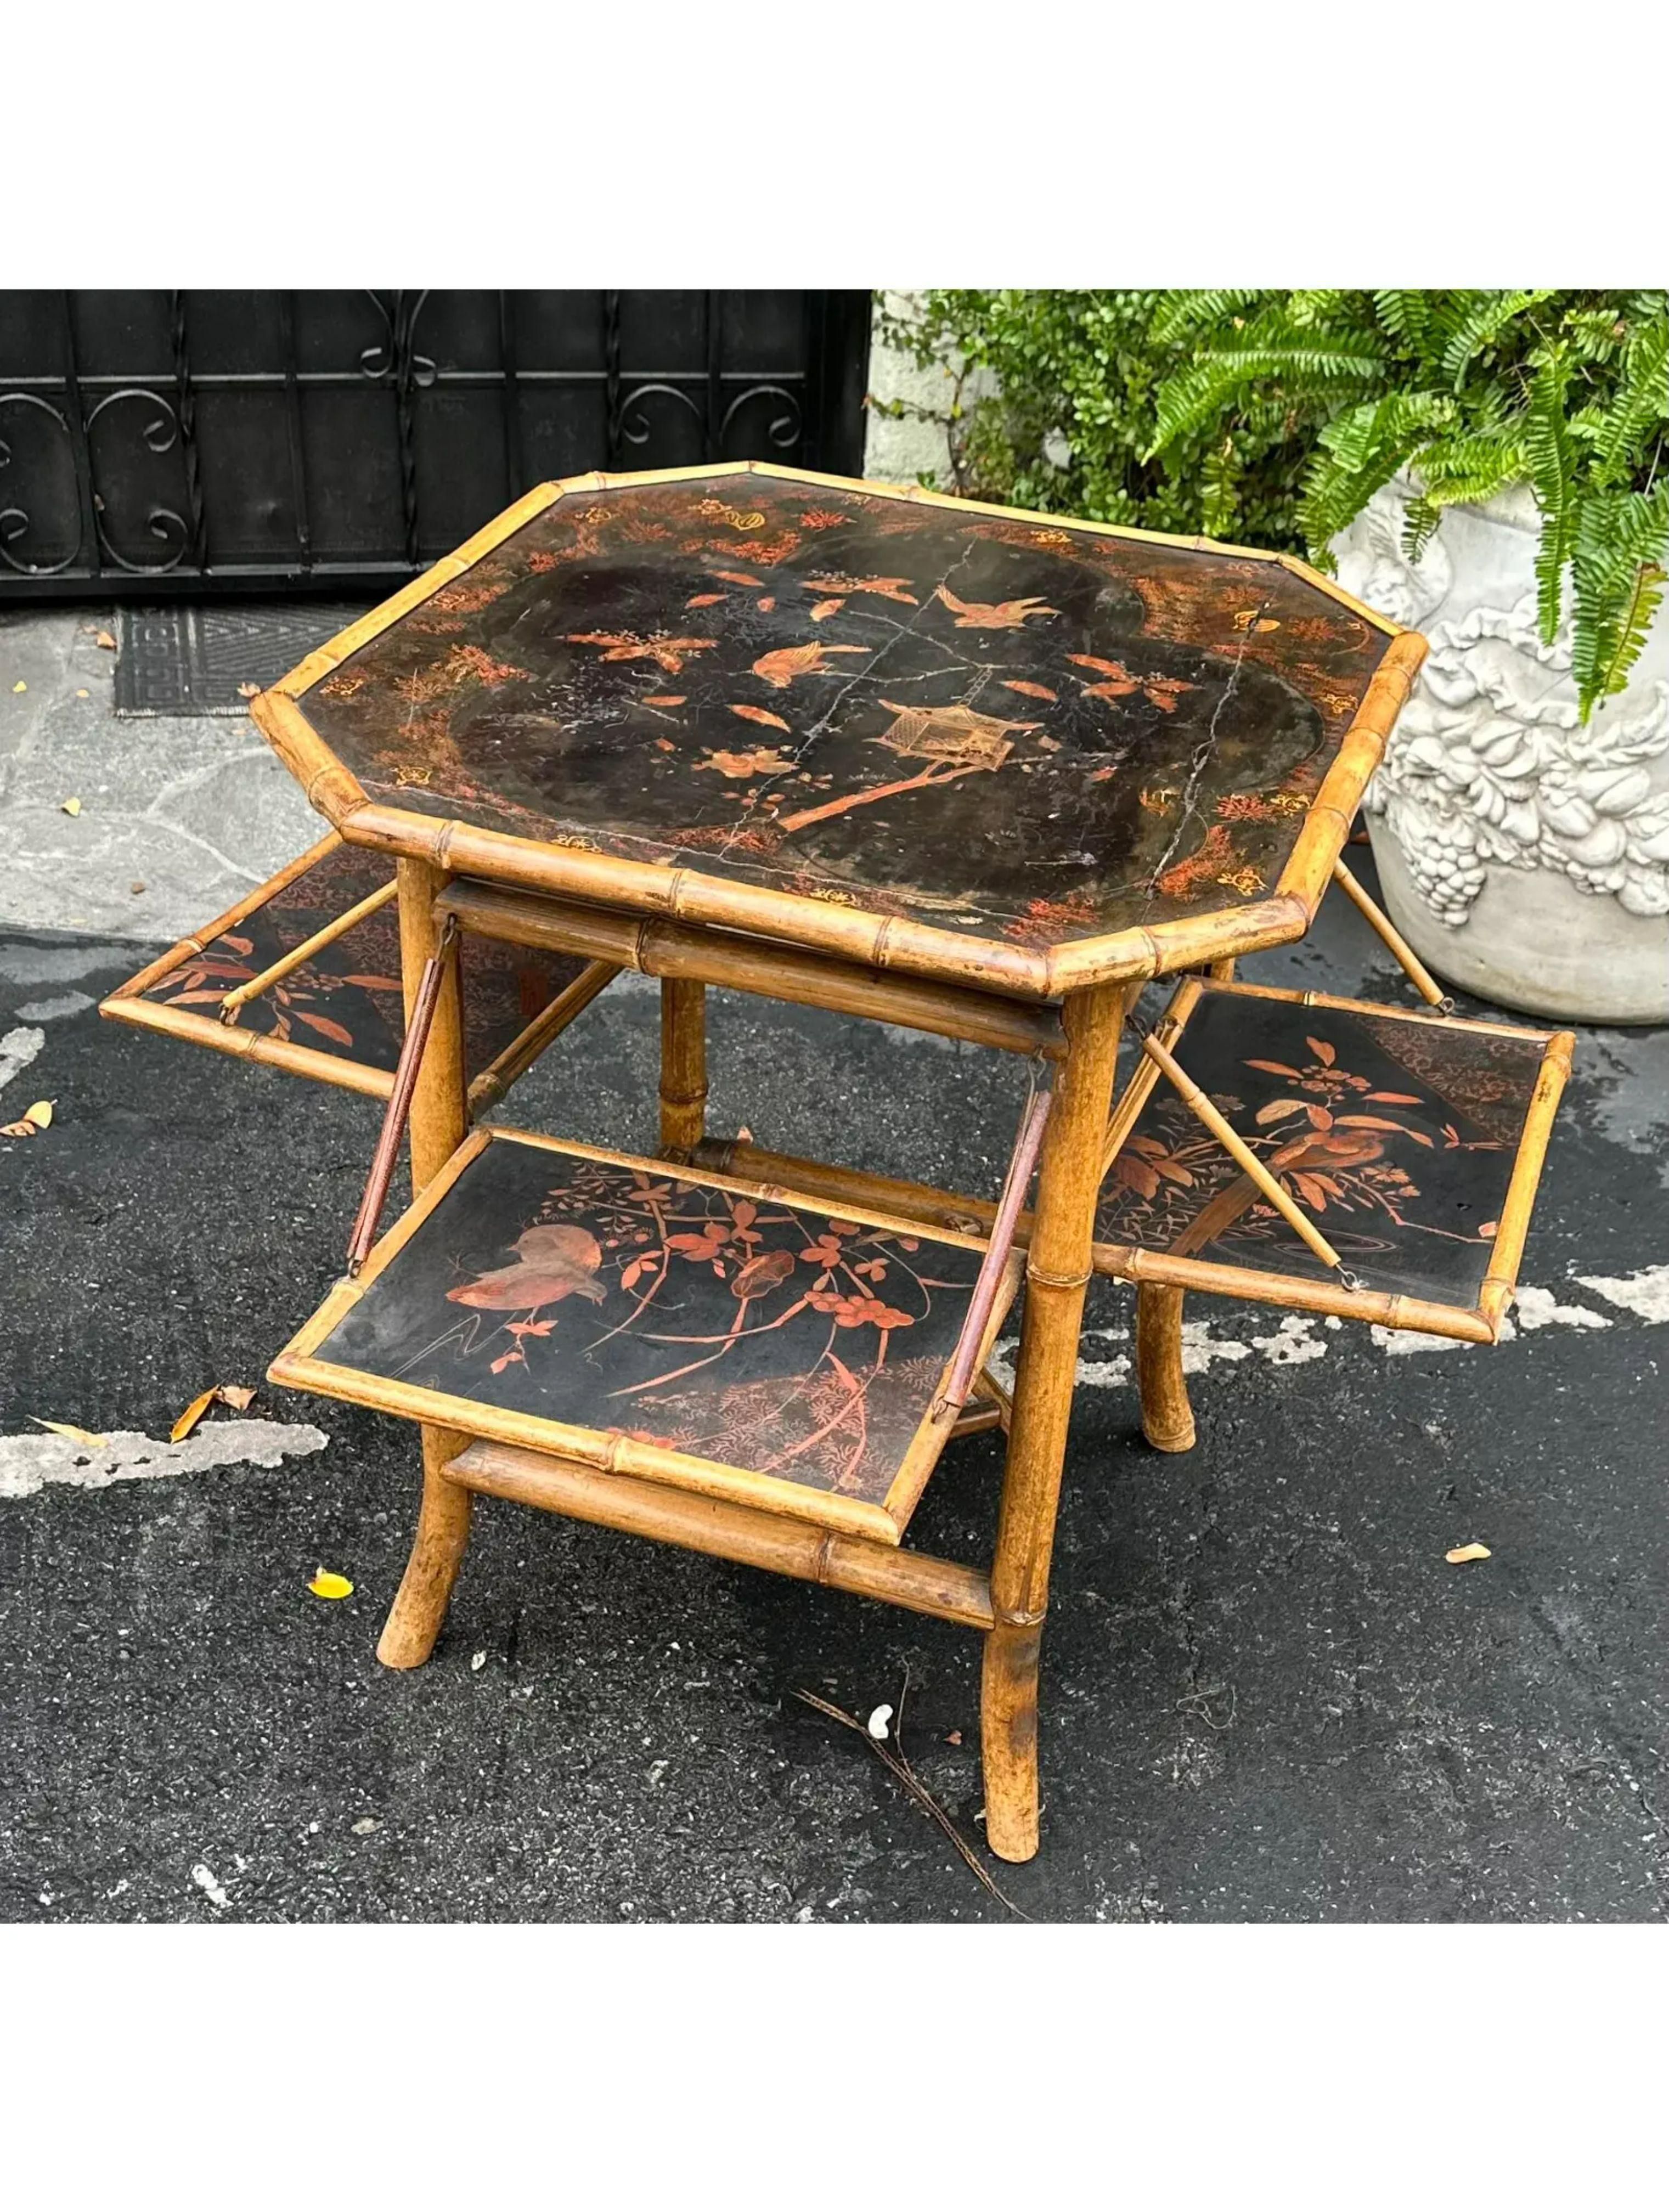 Antique Regency style black chinoiserie bamboo mulit drop leaf table. It features hand painted chinoiserie decoration with four folding drop leaves. The fully extended width is 36